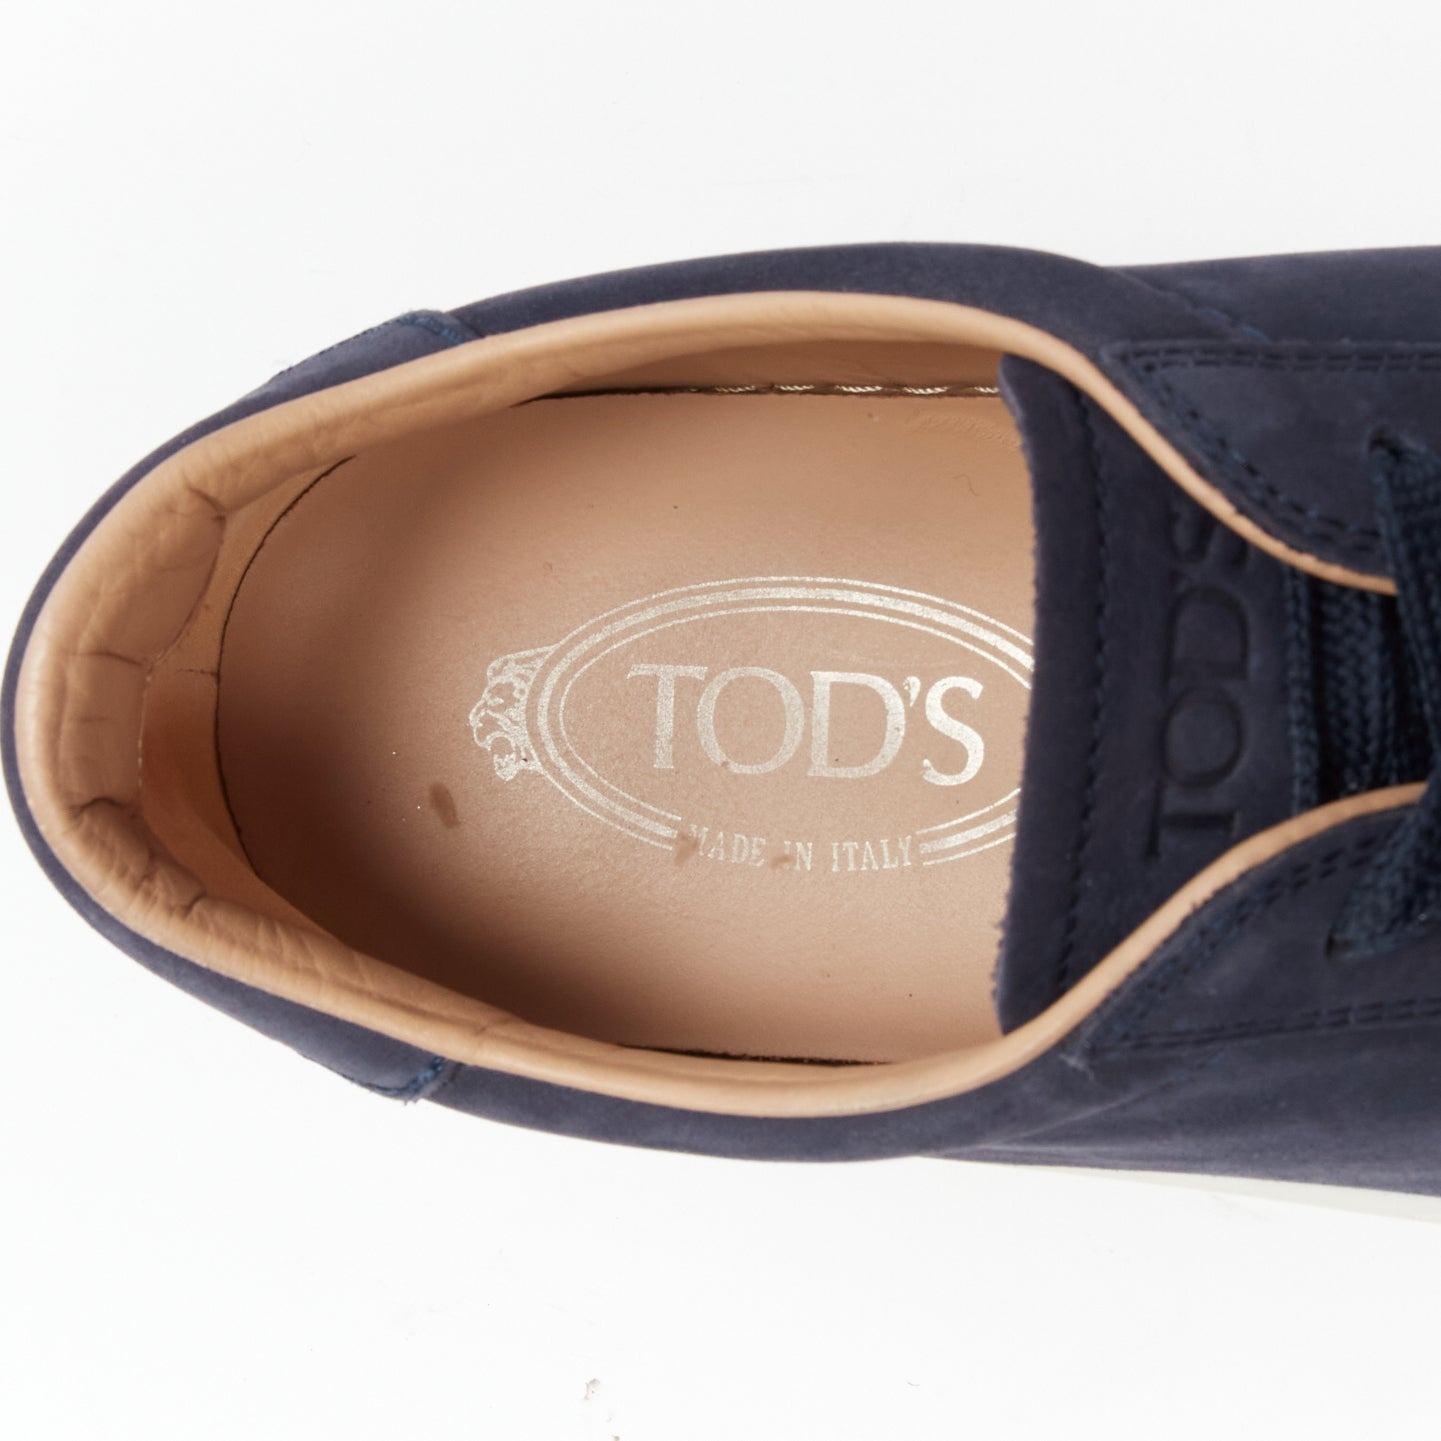 TOD'S navy suede leather espadrille sole low top sneakers UK7.5 EU41.5 4